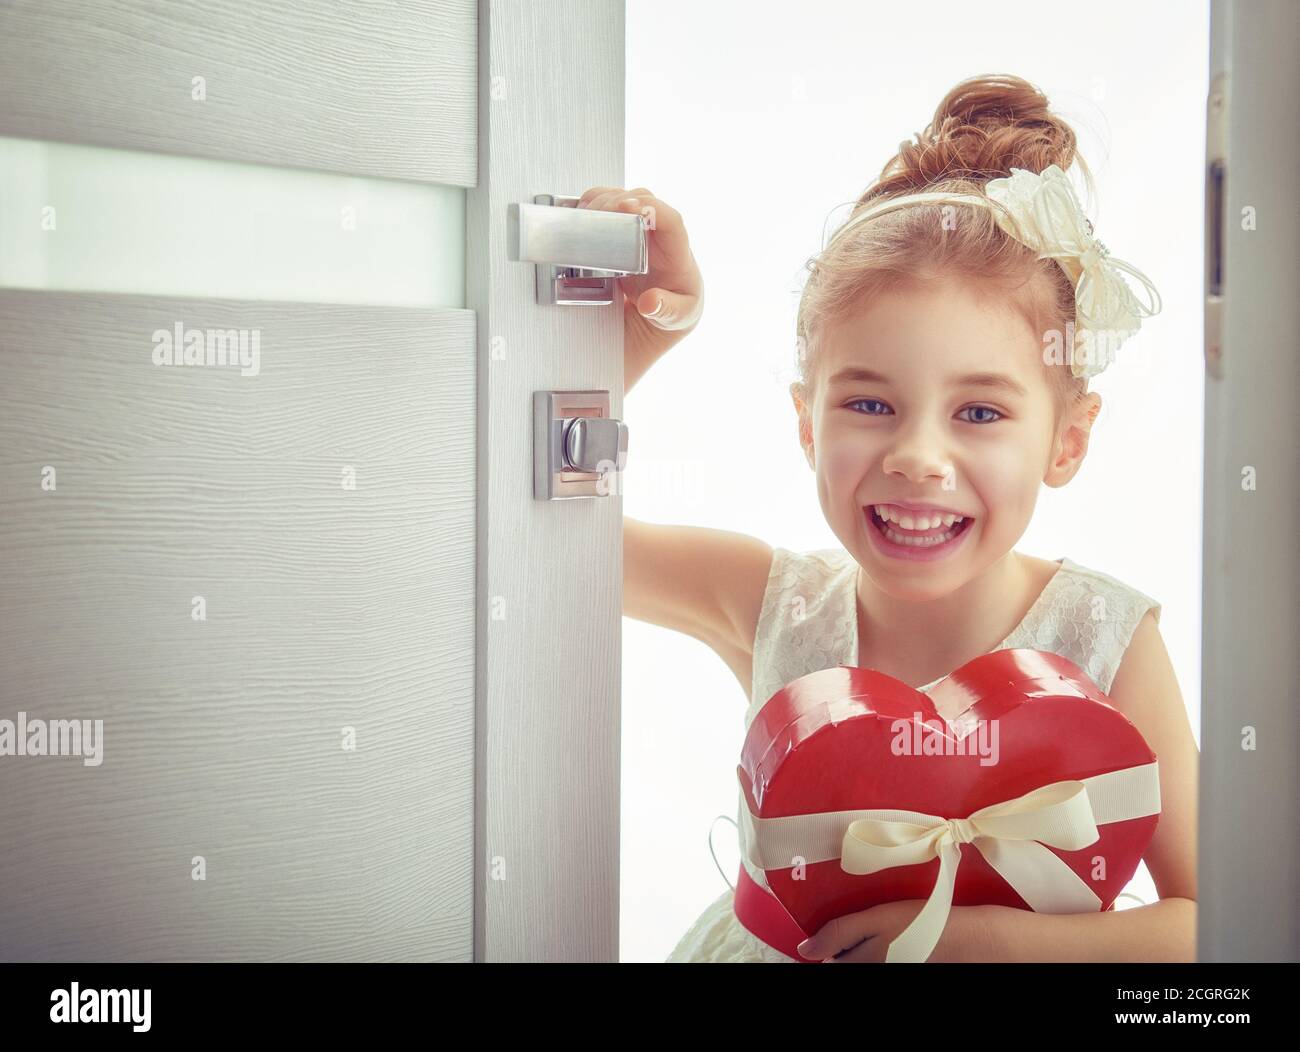 Sweet child girl with red heart. Happy little girl with Valentine's gift opens the door. Wedding, Valentine concept. Stock Photo